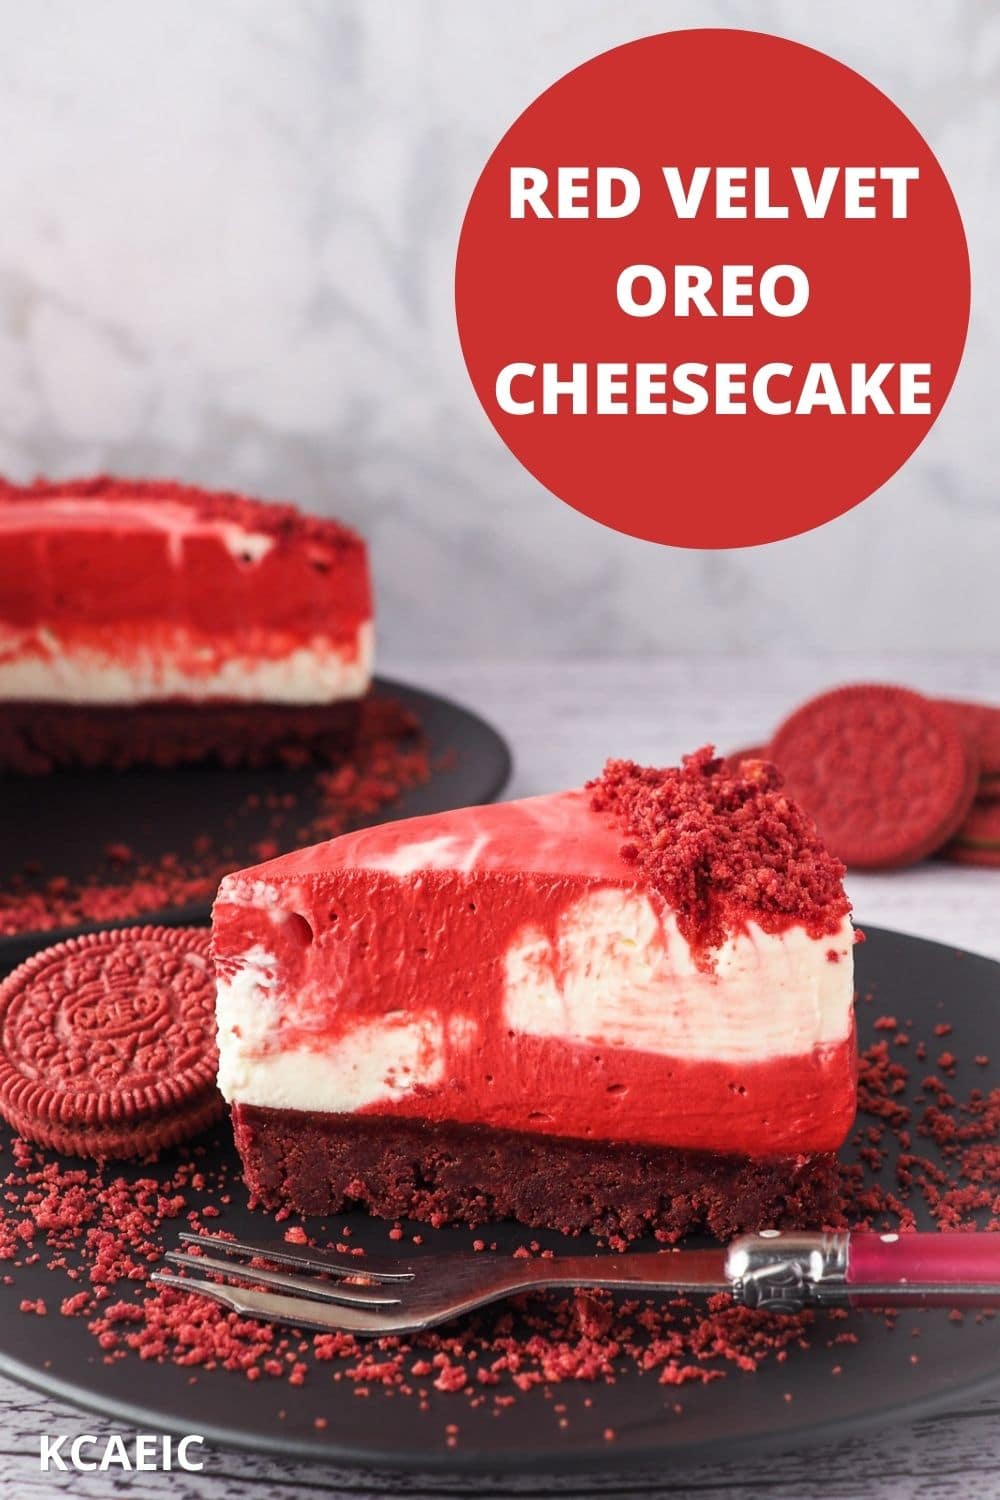 Cheesecake on a plate with fork, Oreo crumbs, with rest of cake and Oreos in background, with text overlay Red Velvet Oreo Cheesecake and KCAEIC.